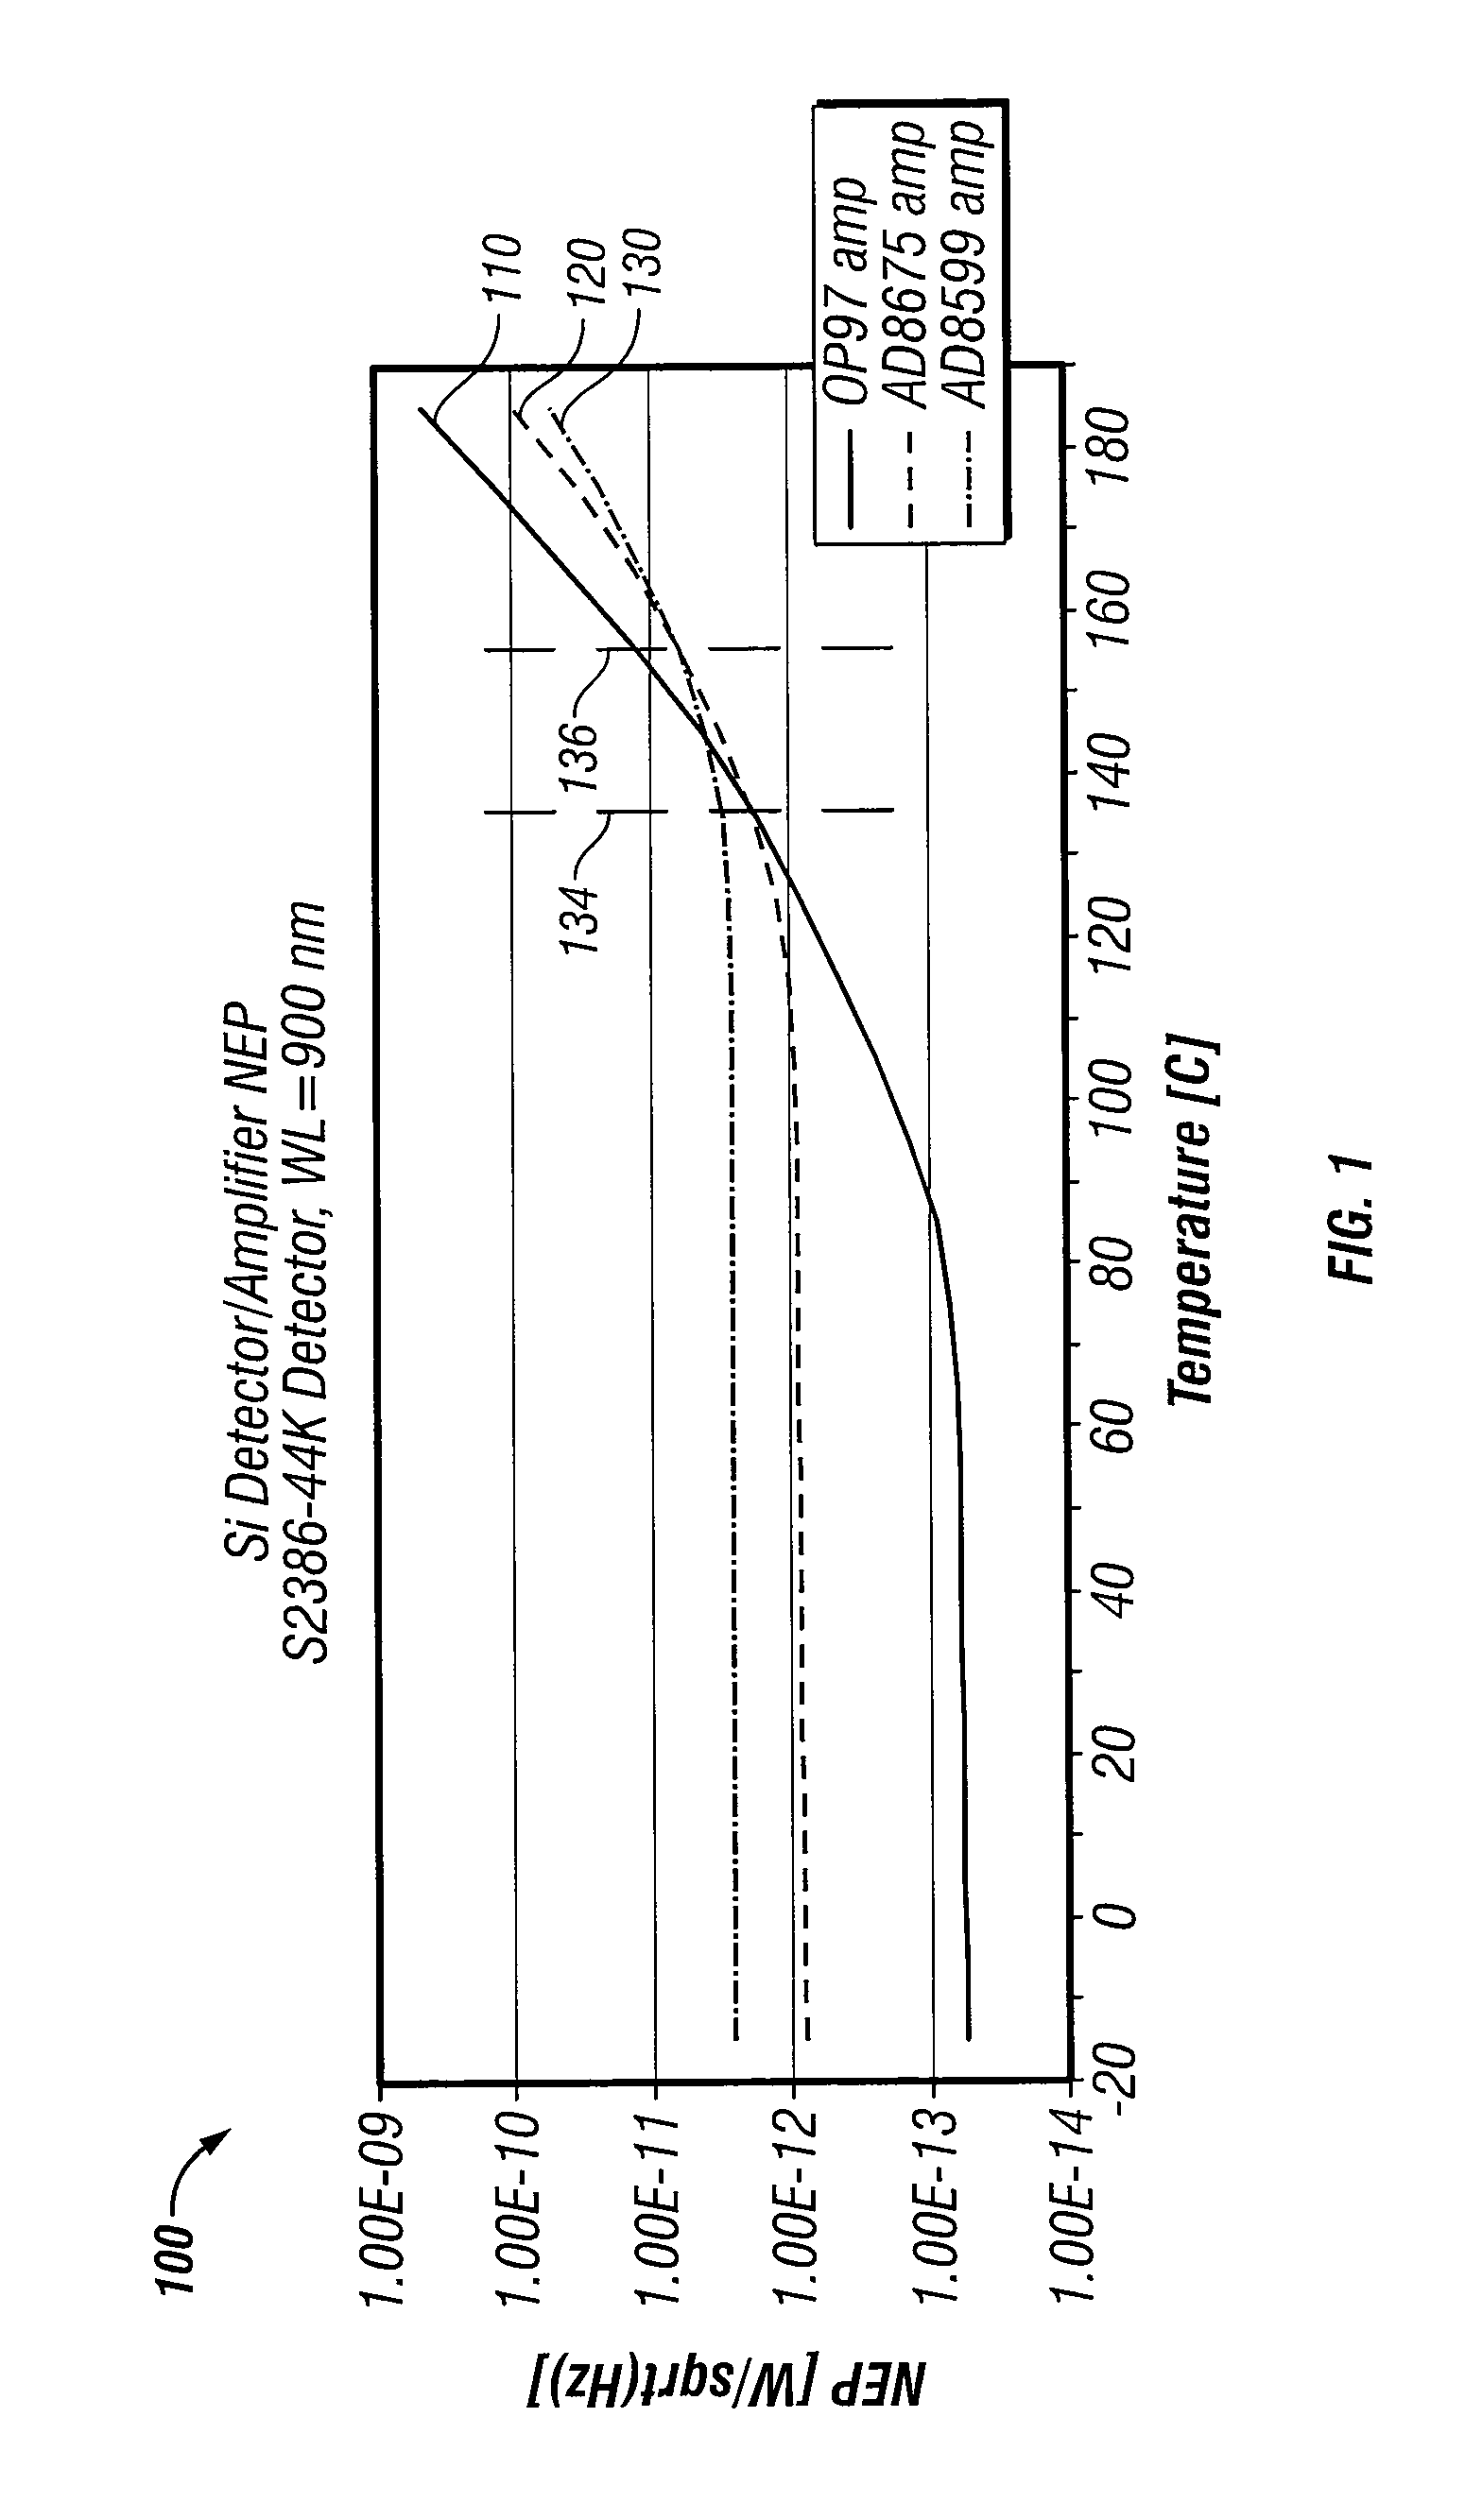 Detector, preamplifier selection apparatus, systems, and methods